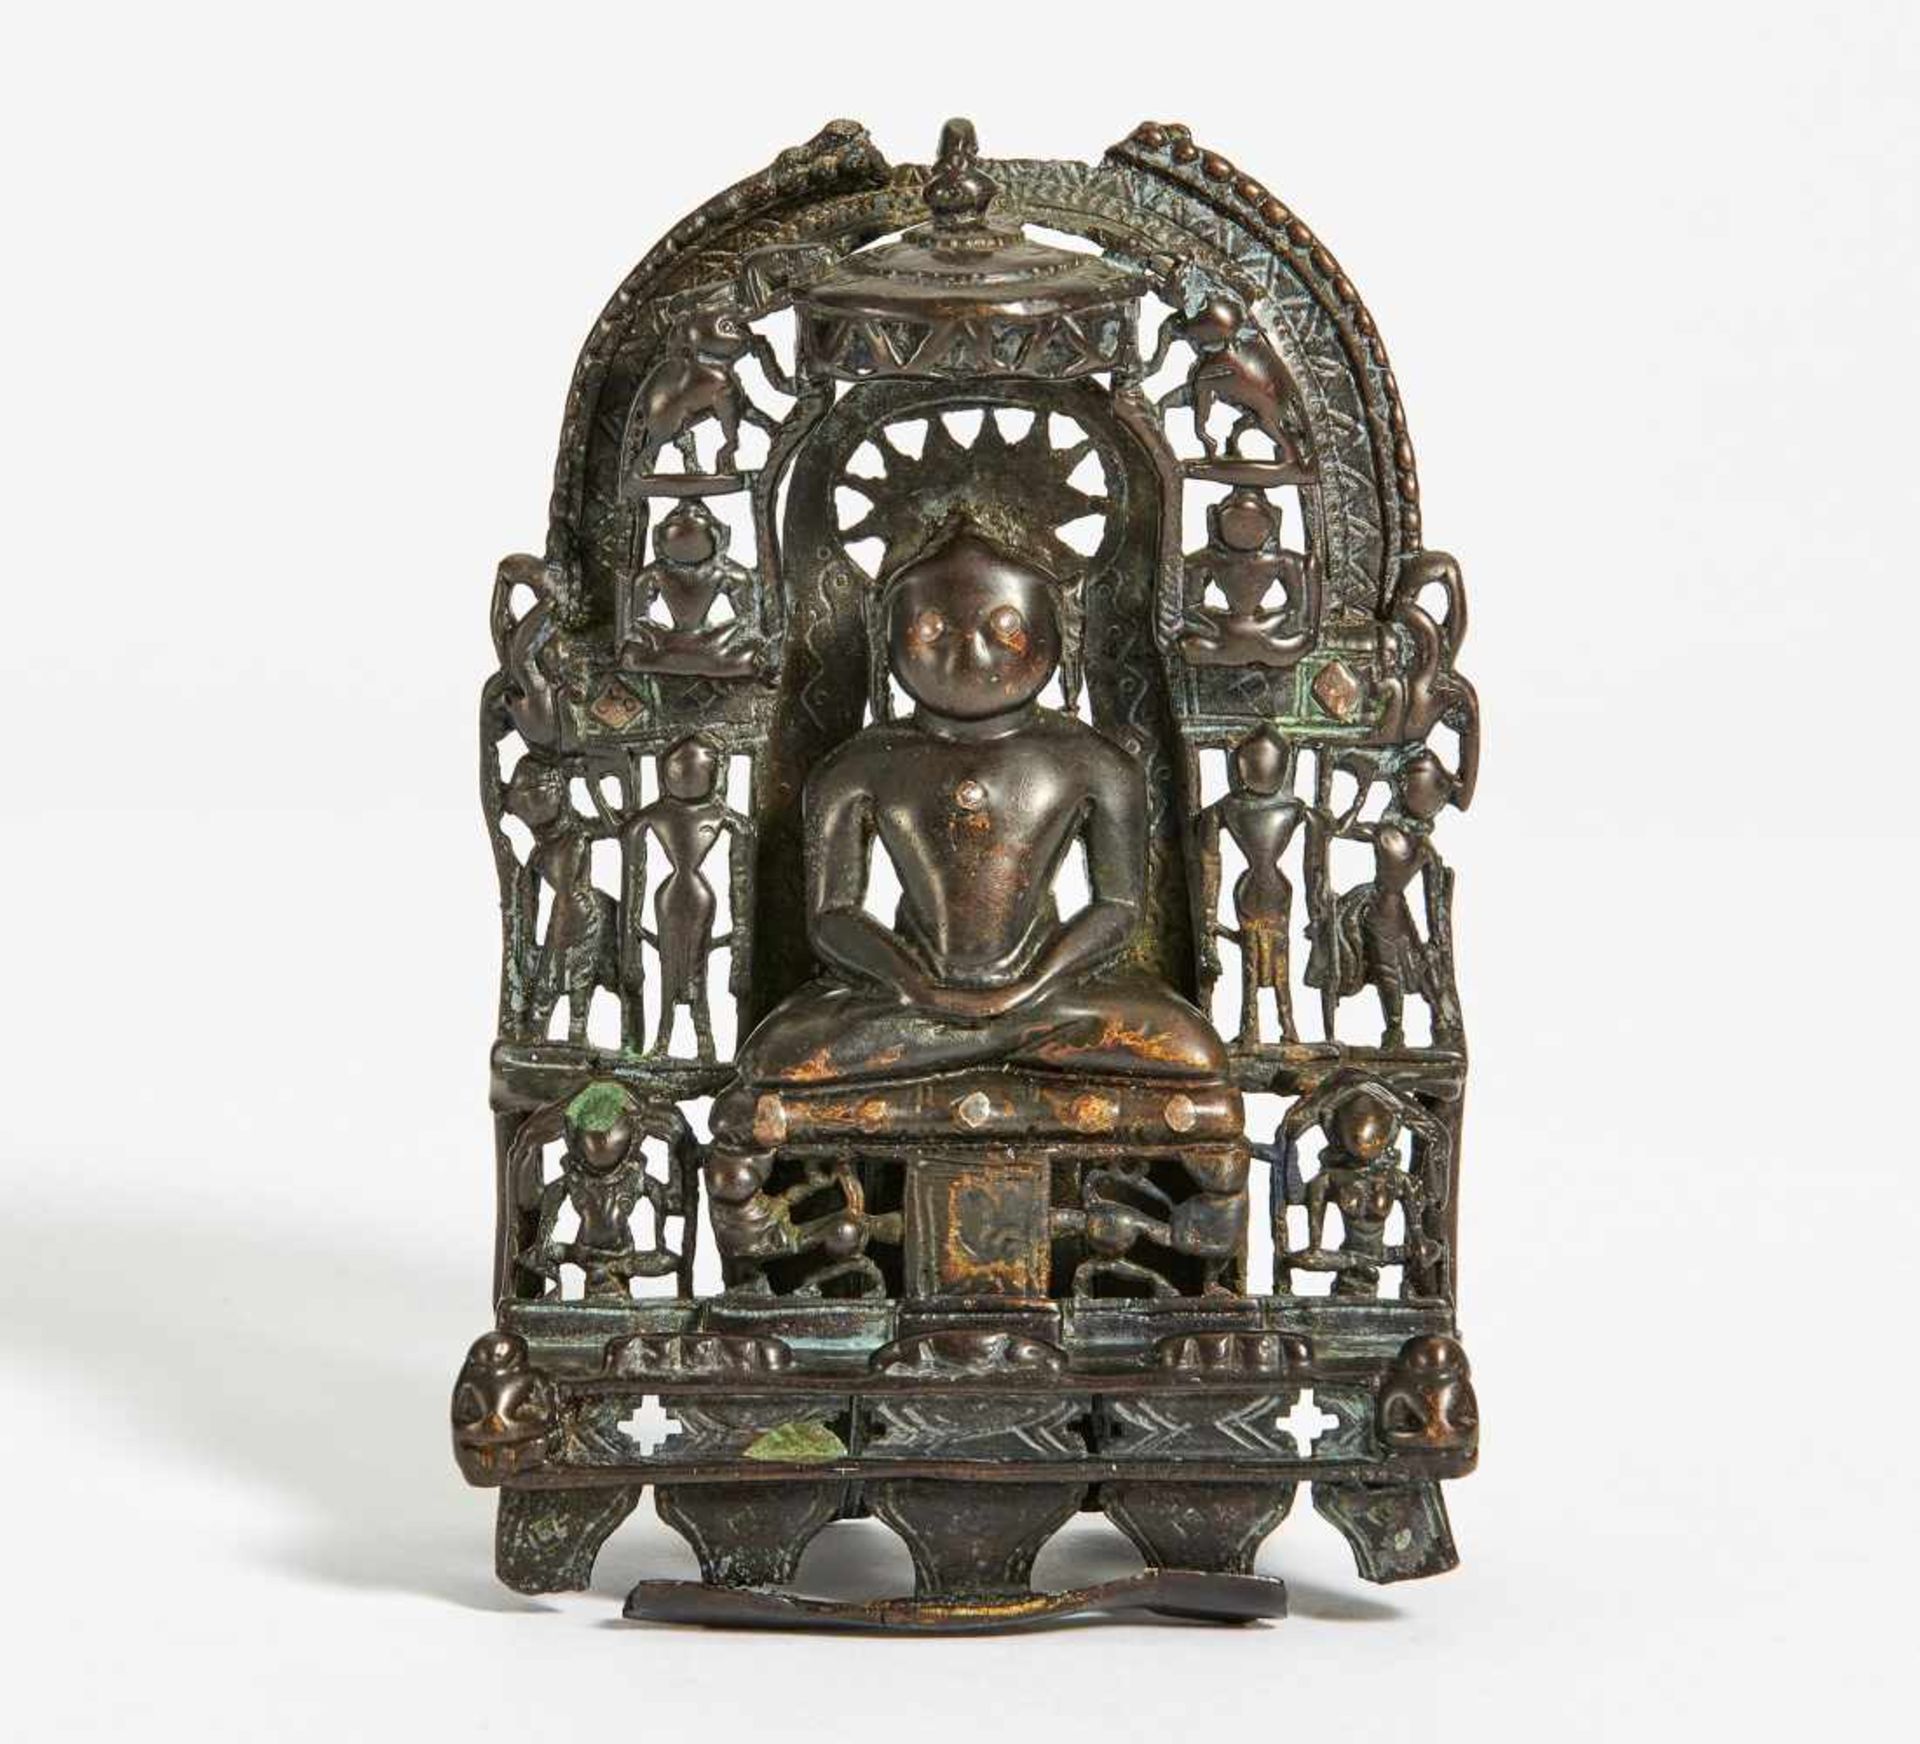 SMALL JAIN ALTAR. India. On the back dated 15th c. Copper bronze with inlays of copper and silver,